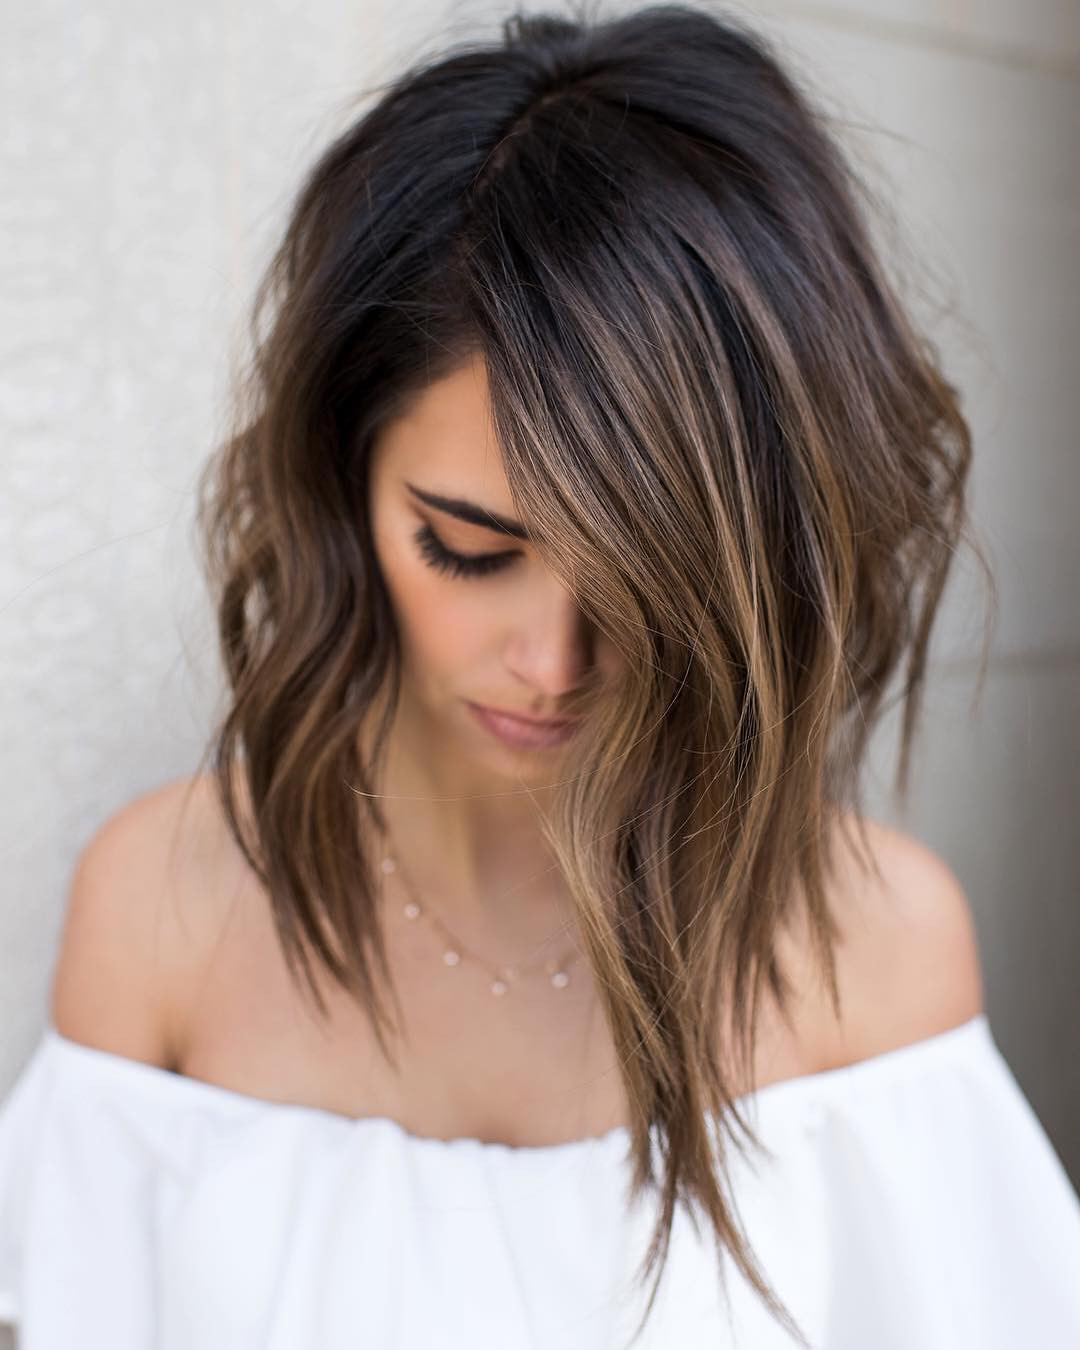 Hairstyles And Colors For Medium Length Hair
 10 Ombre Balayage Hairstyles for Medium Length Hair Hair